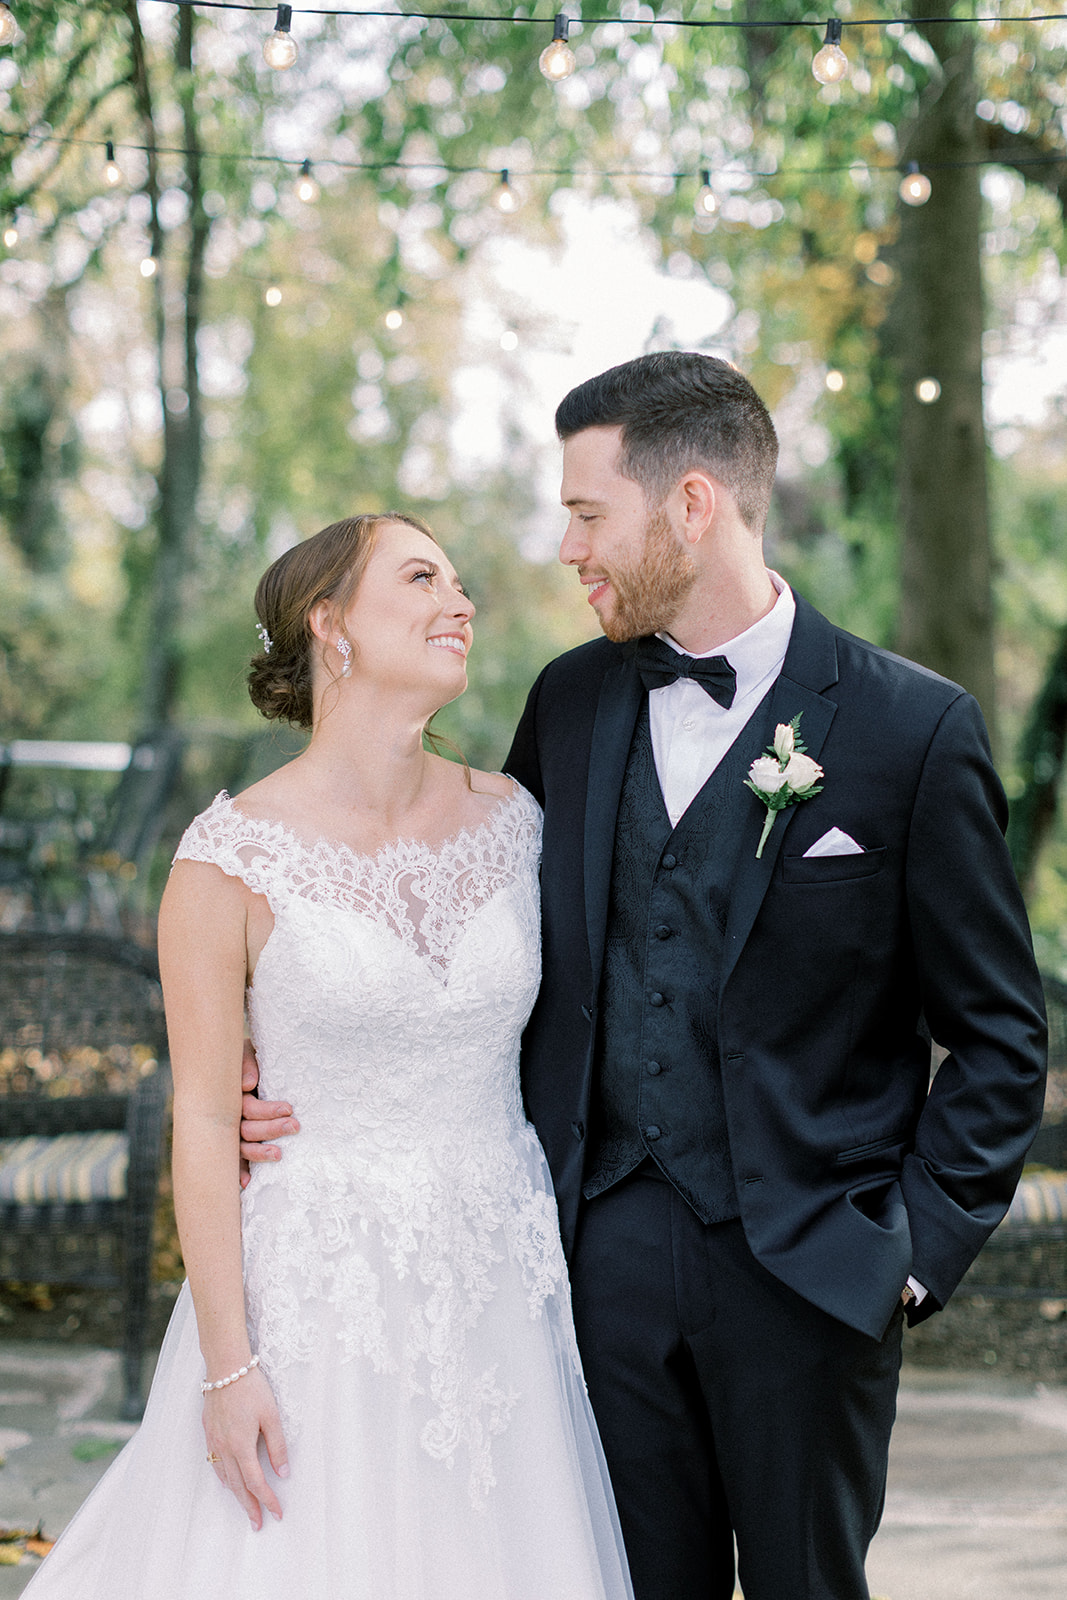 Pennsylvania wedding photographer captures bride and groom looking at one another